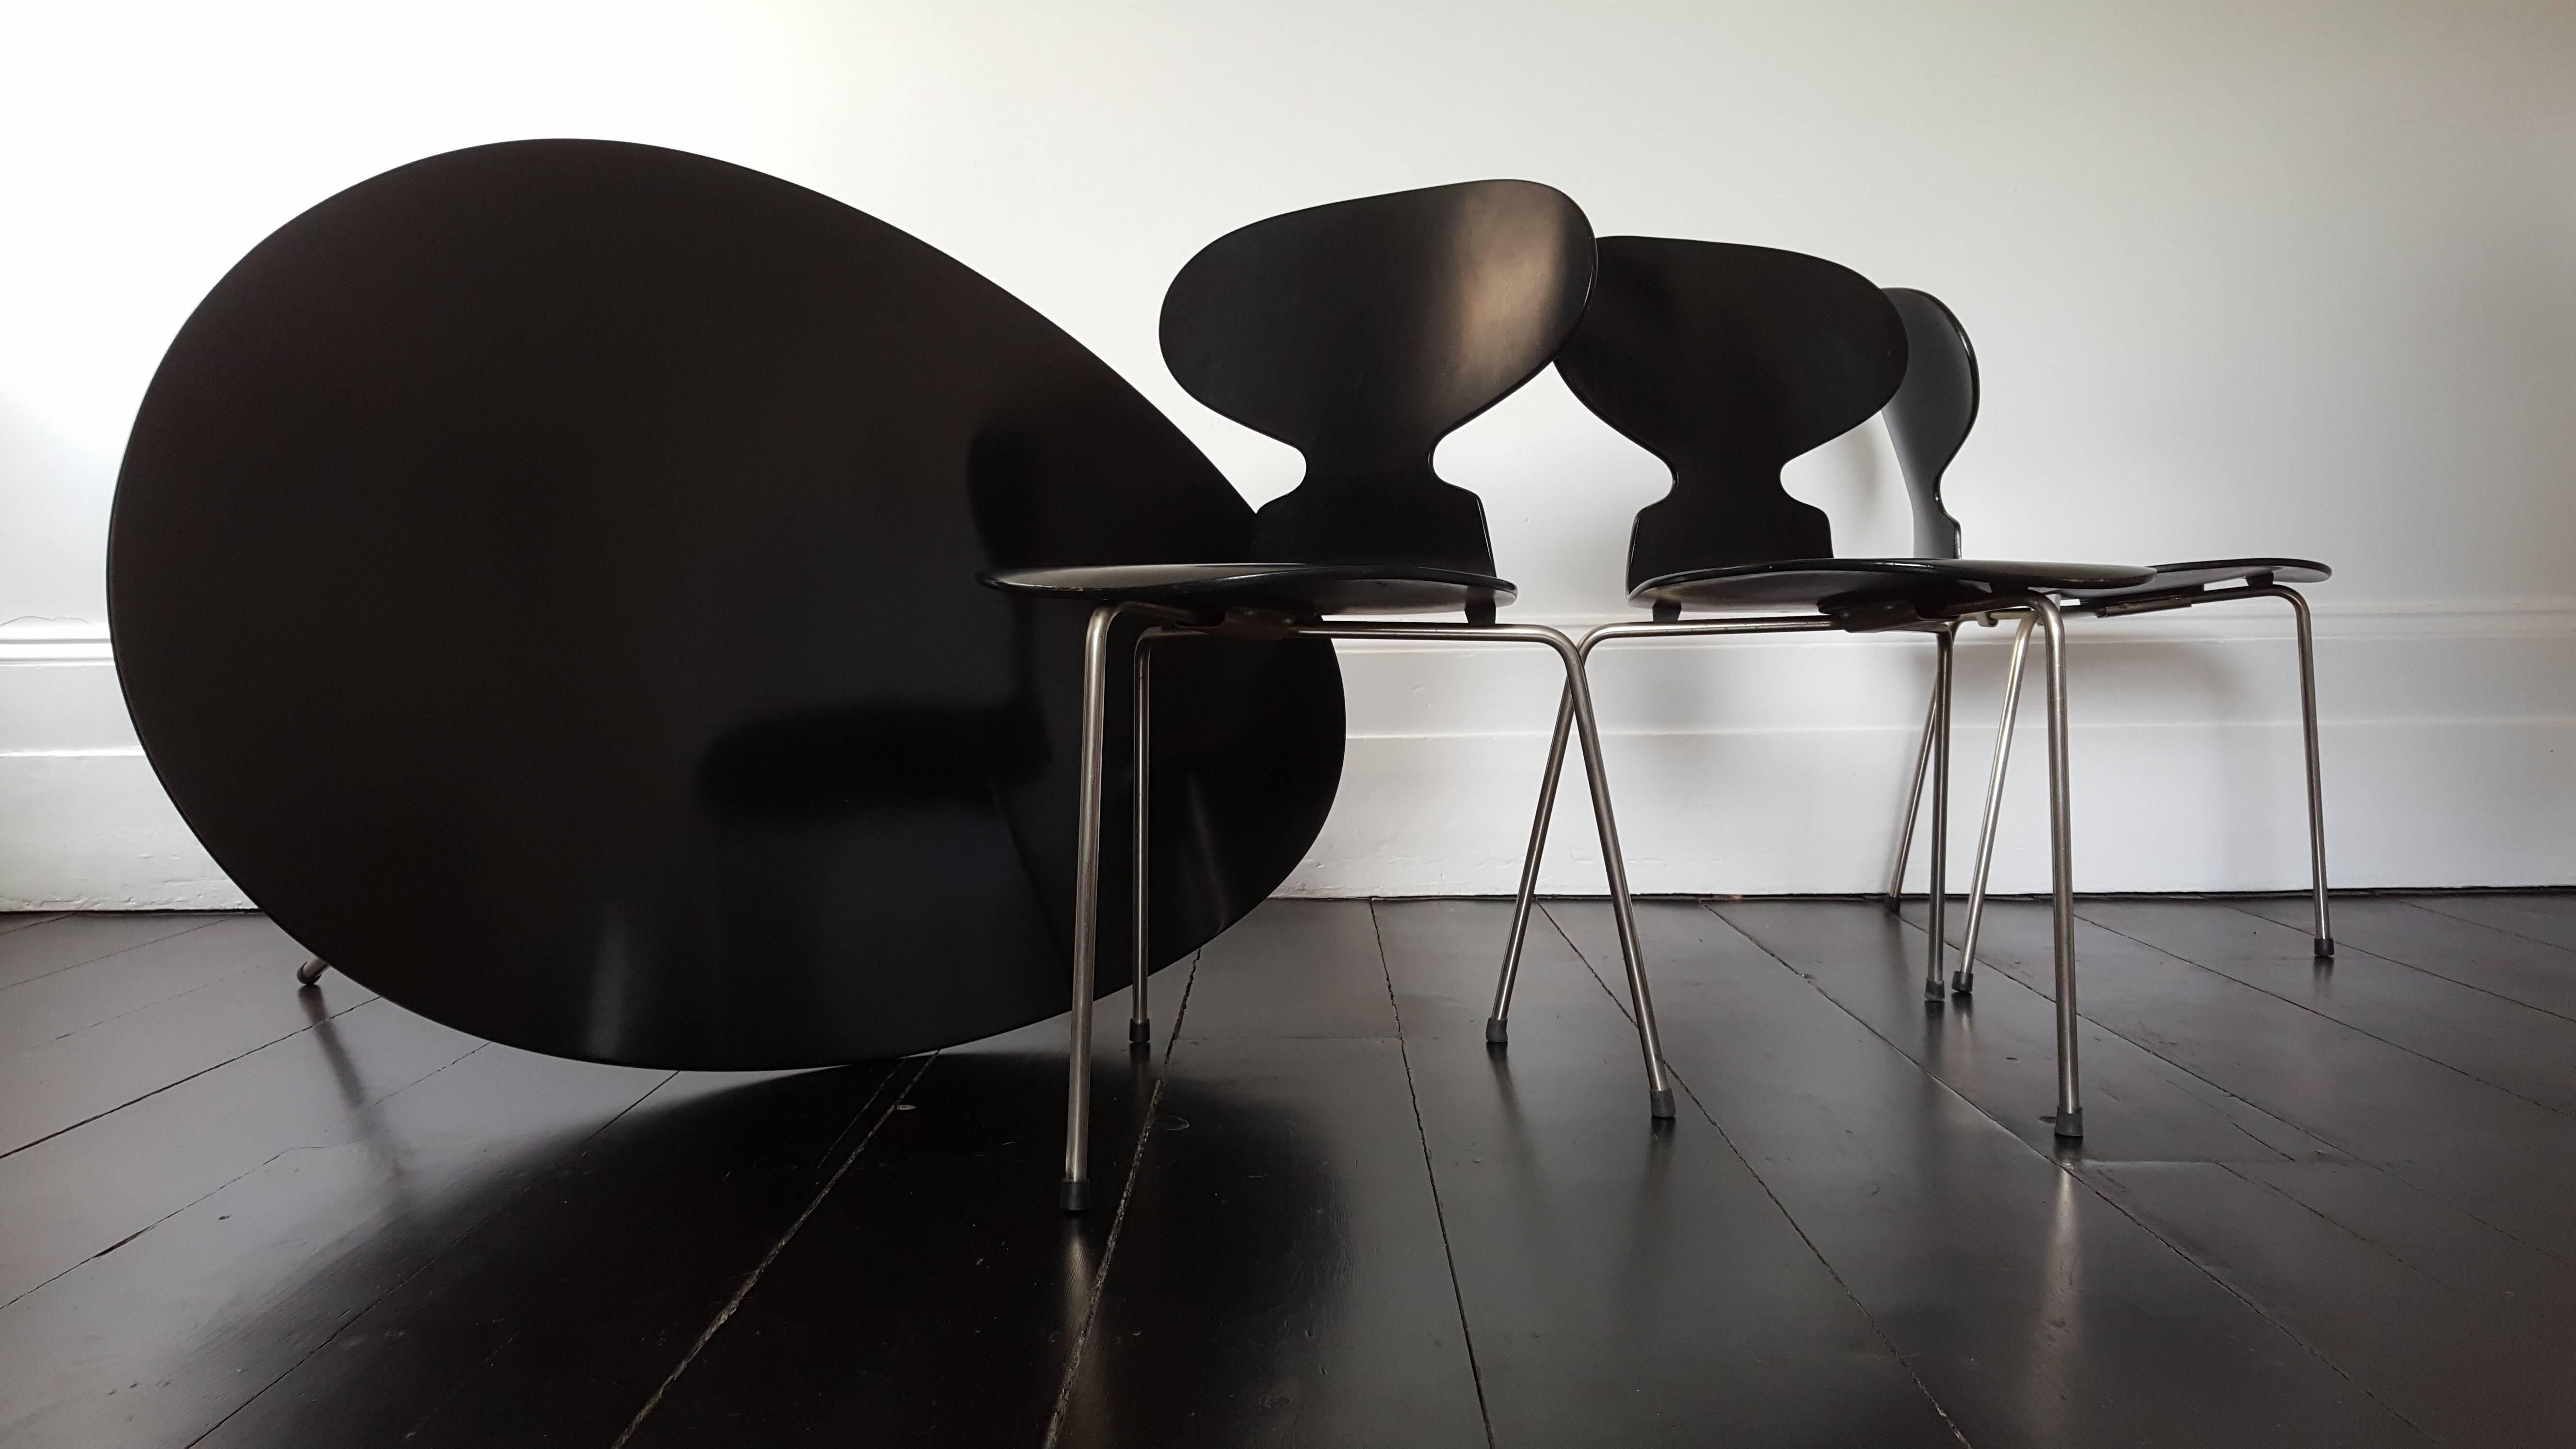 An Arne Jacobsen egg table and four "Ant" chairs for Fritz Hansen

Arne Jacobsen egg table (Model 3603) and four "Ant" chairs for Fritz Hansen finished with finished with original black lacquer on steel legs. 

Originally